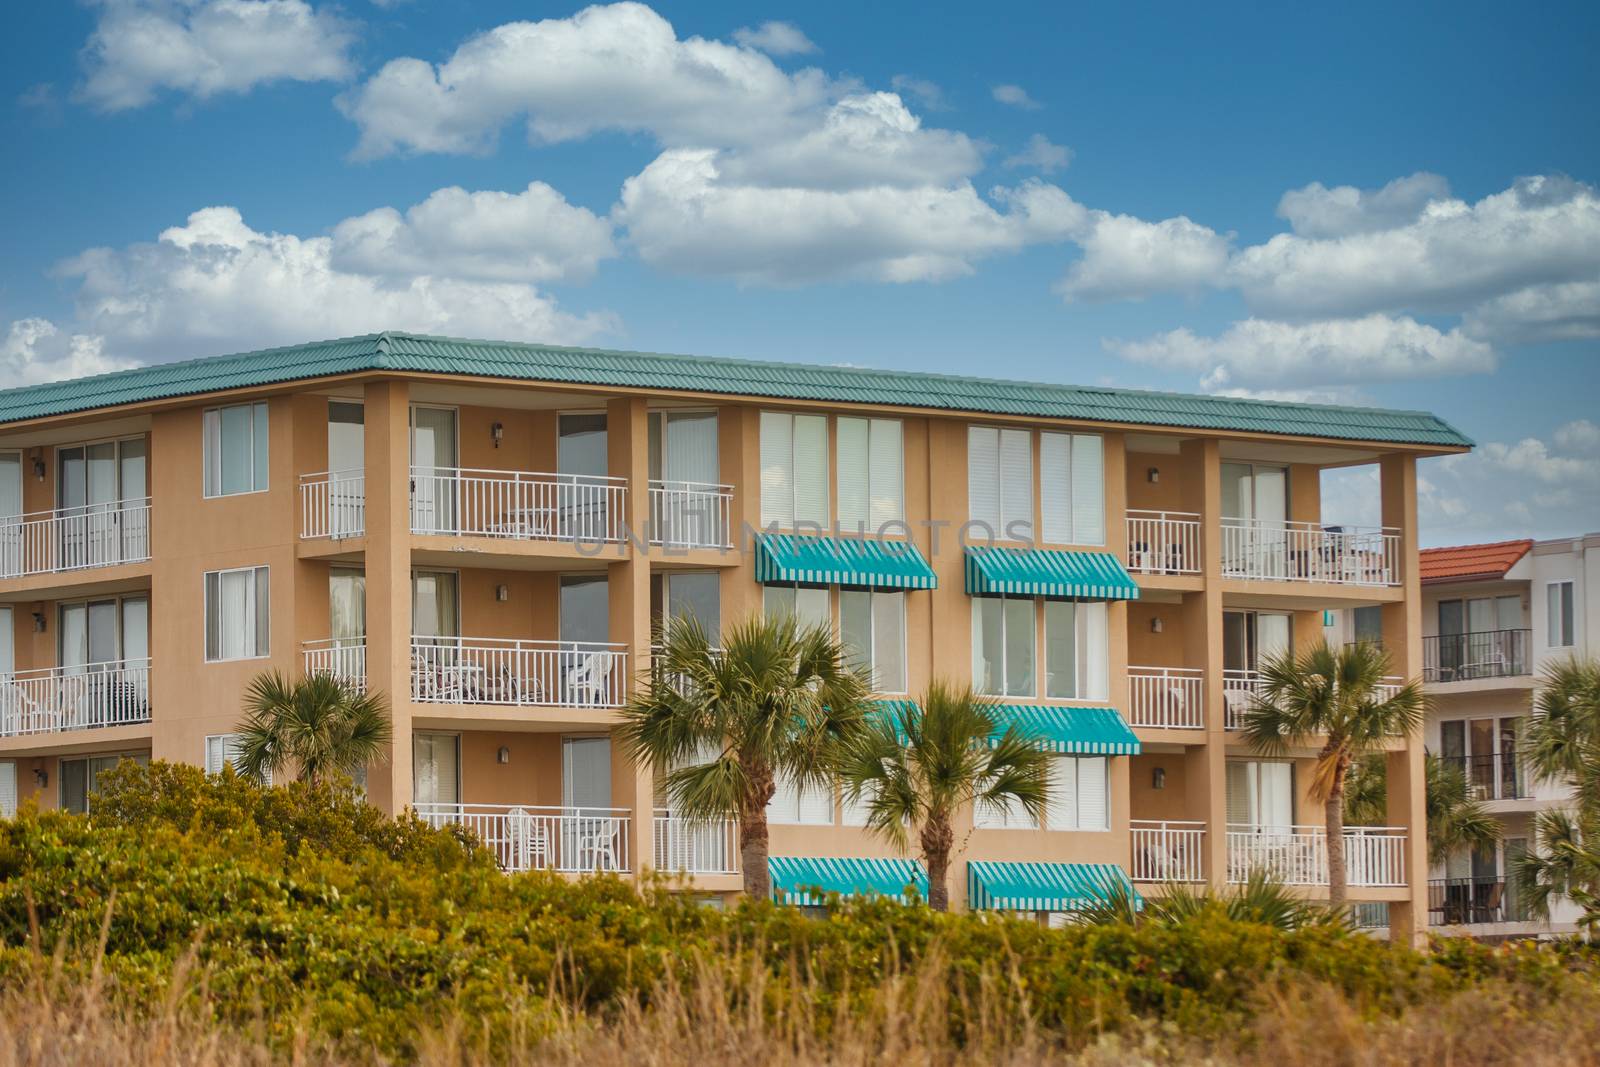 A coastal condo building of pink stucco with green metal roof and awnings